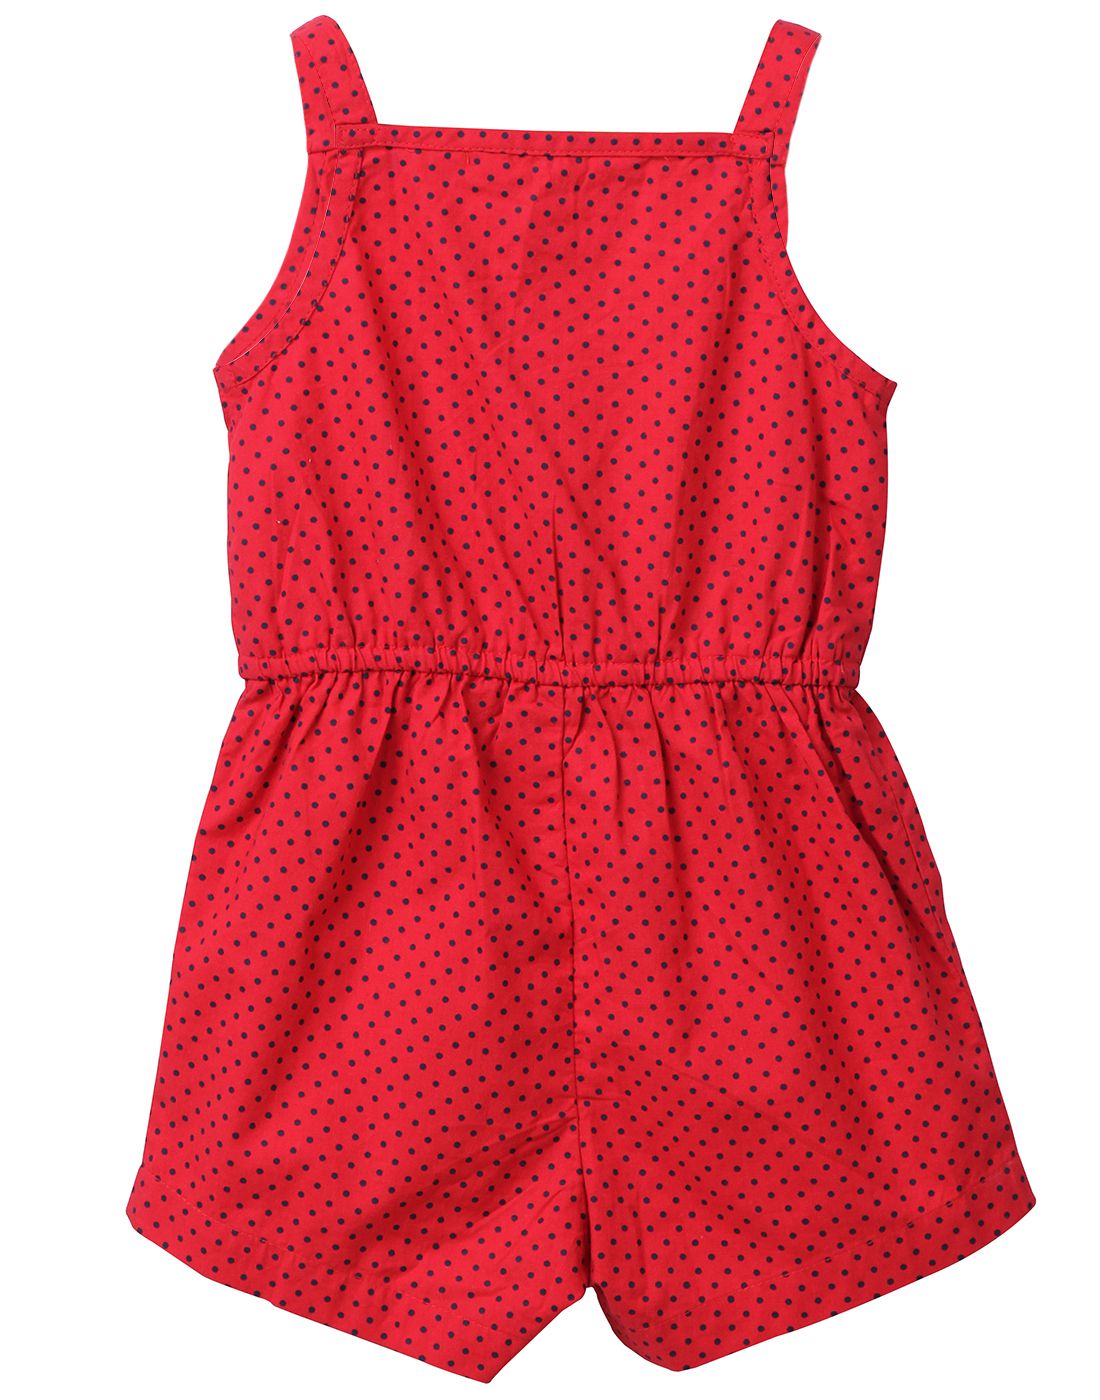 Red Polka Dot Jumpsuit - Buy Red Polka Dot Jumpsuit Online at Low Price ...